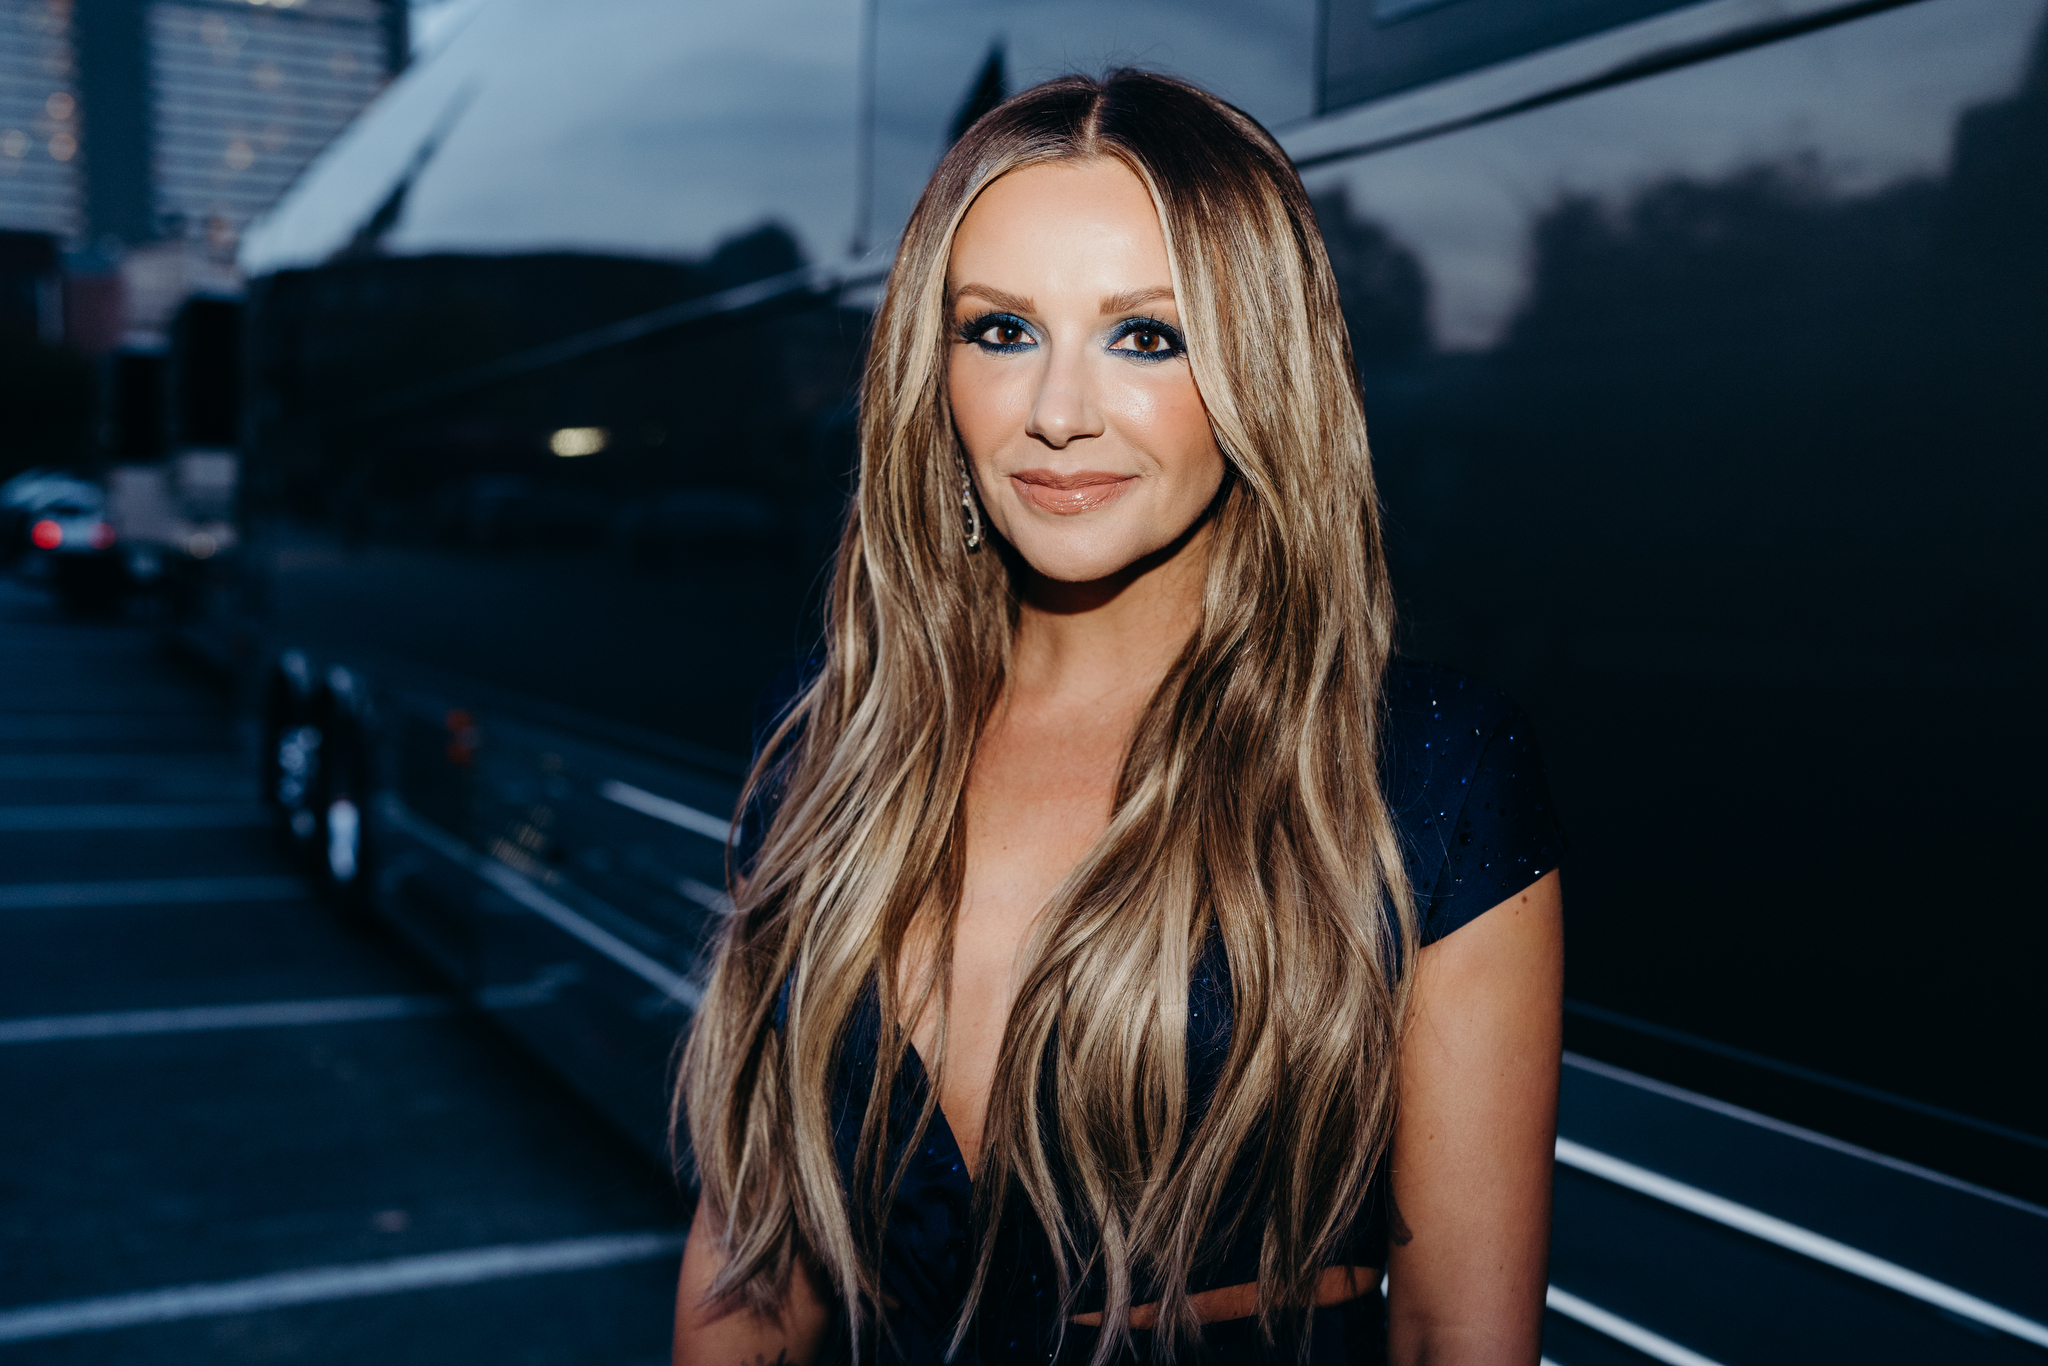 Behind The Scenes With Country Star Carly Pearce [PHOTOS]